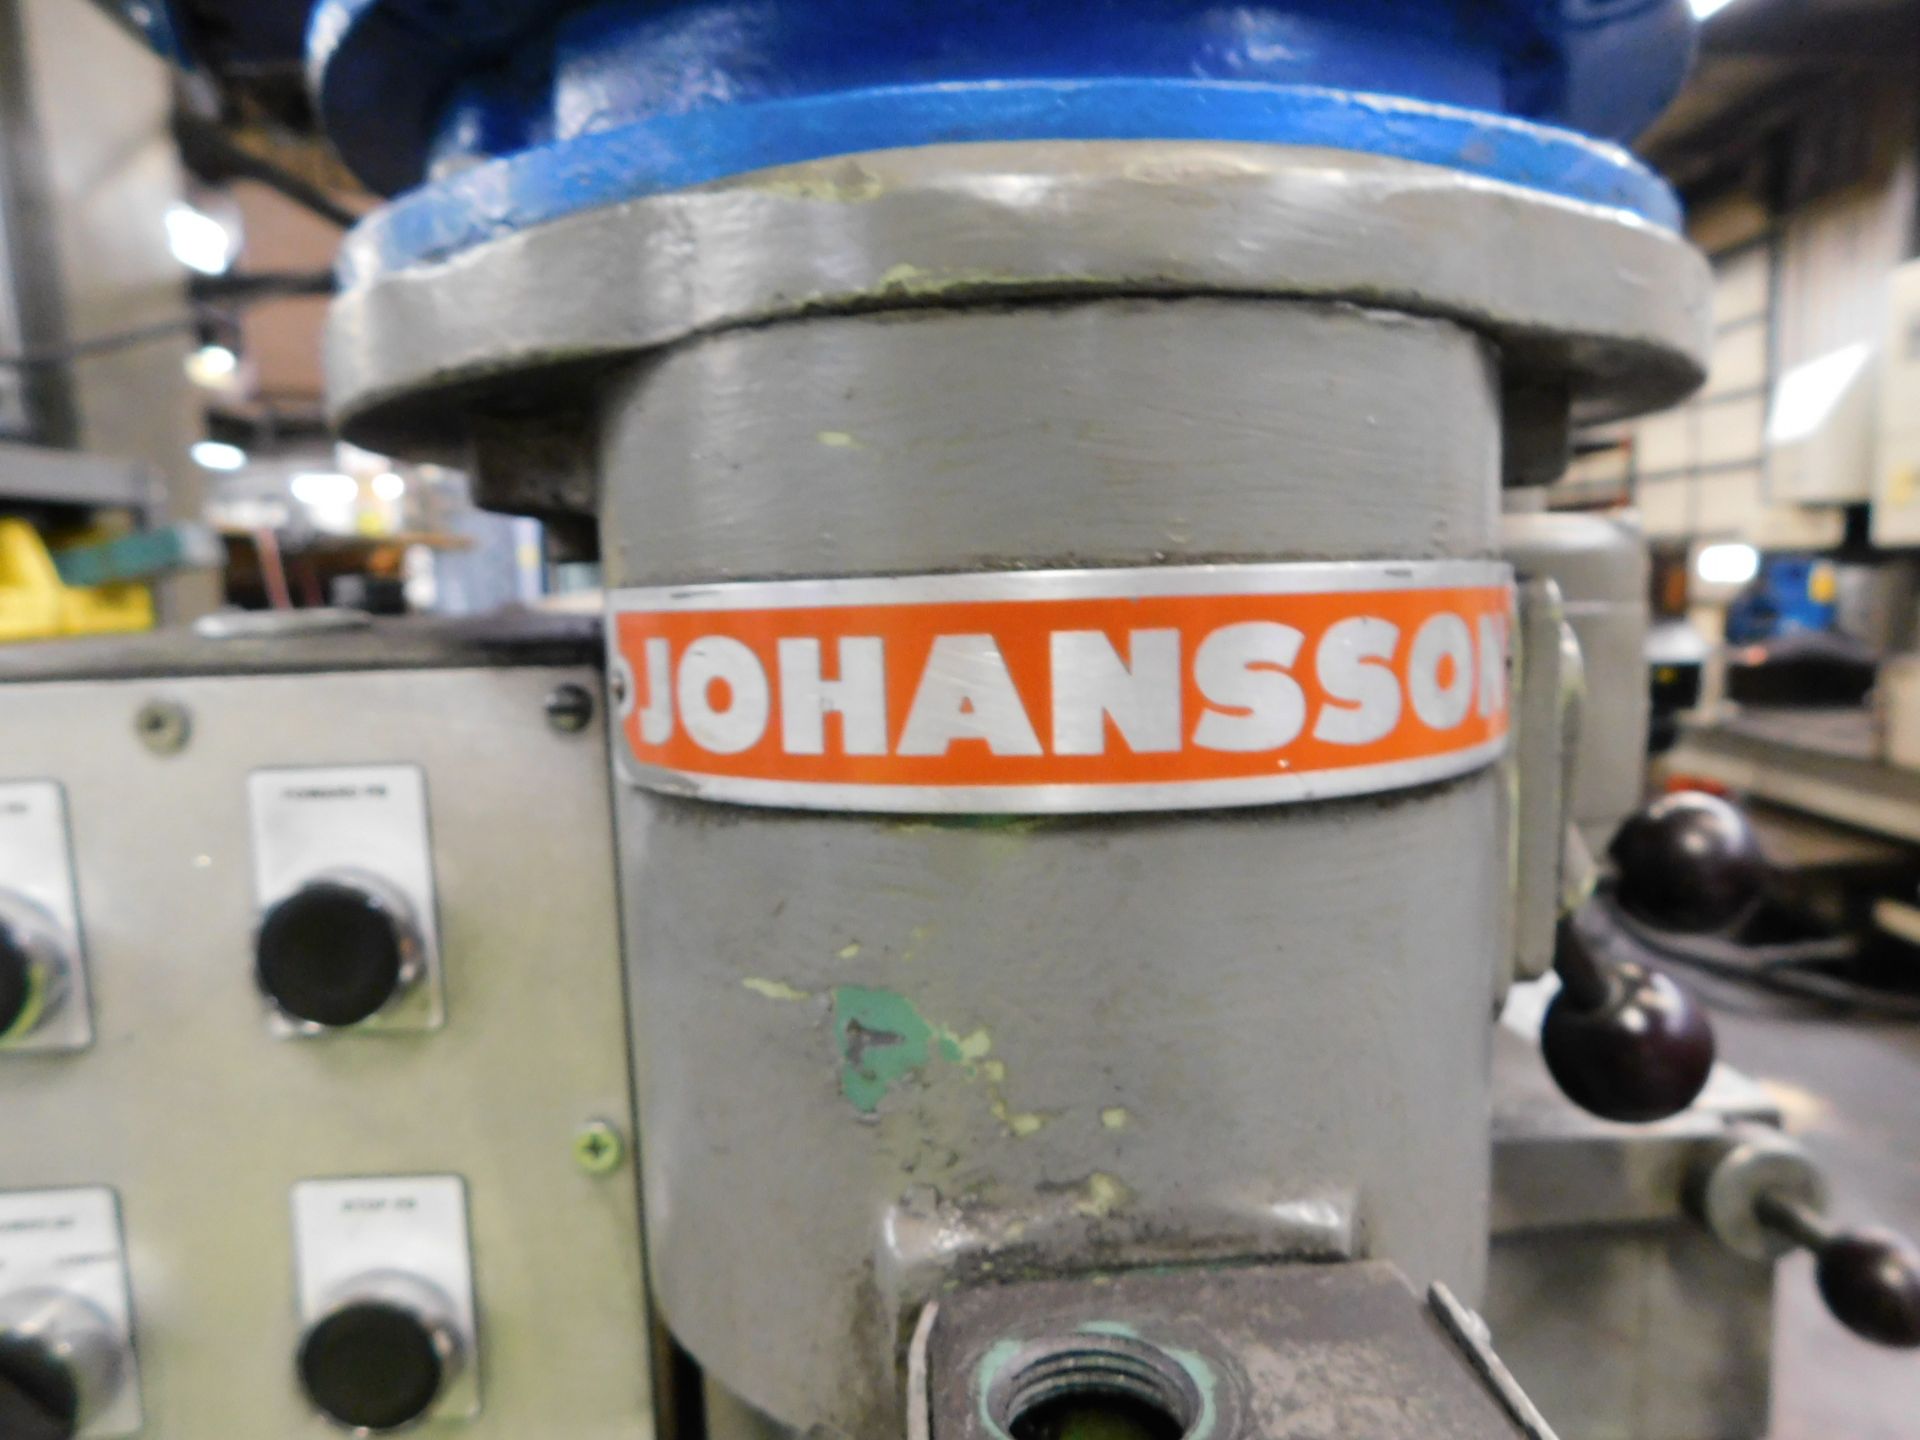 Johansson Radial Drill, s/n 32320, Quill Powerfeed, 20" X 40" T-Slotted Production Table - Image 10 of 12